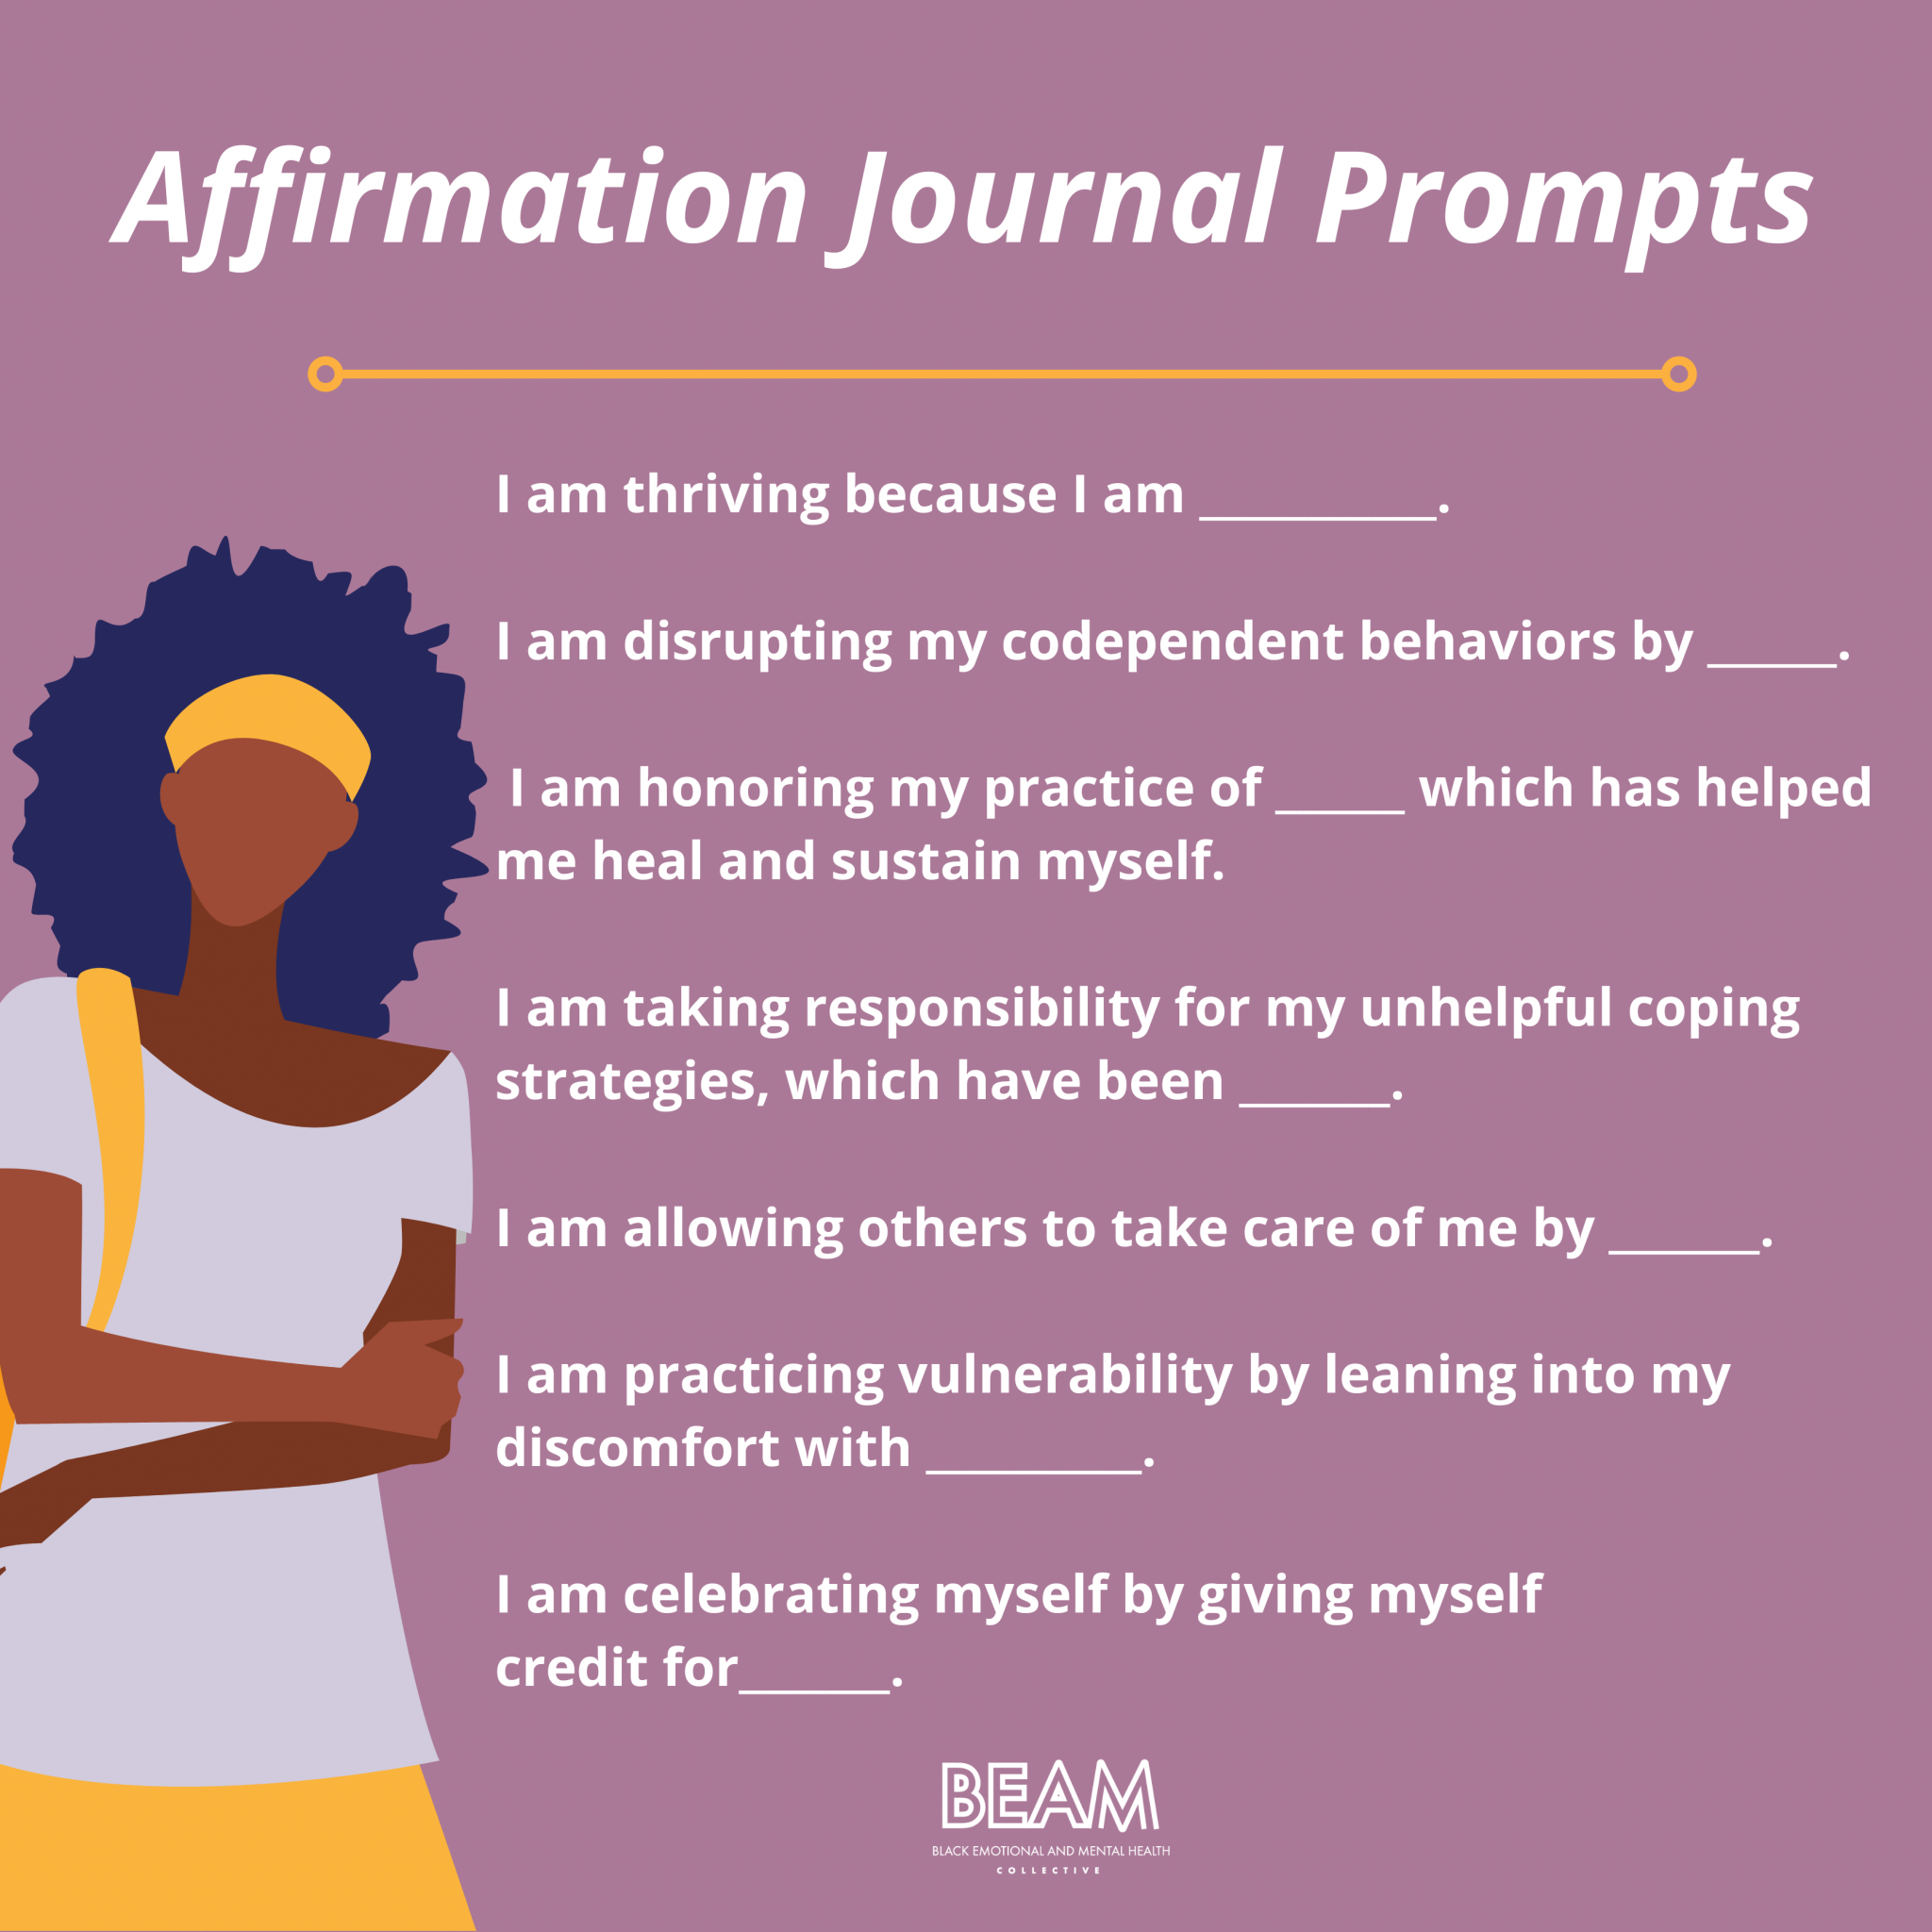 Affirmation Journal Prompts from BEAM